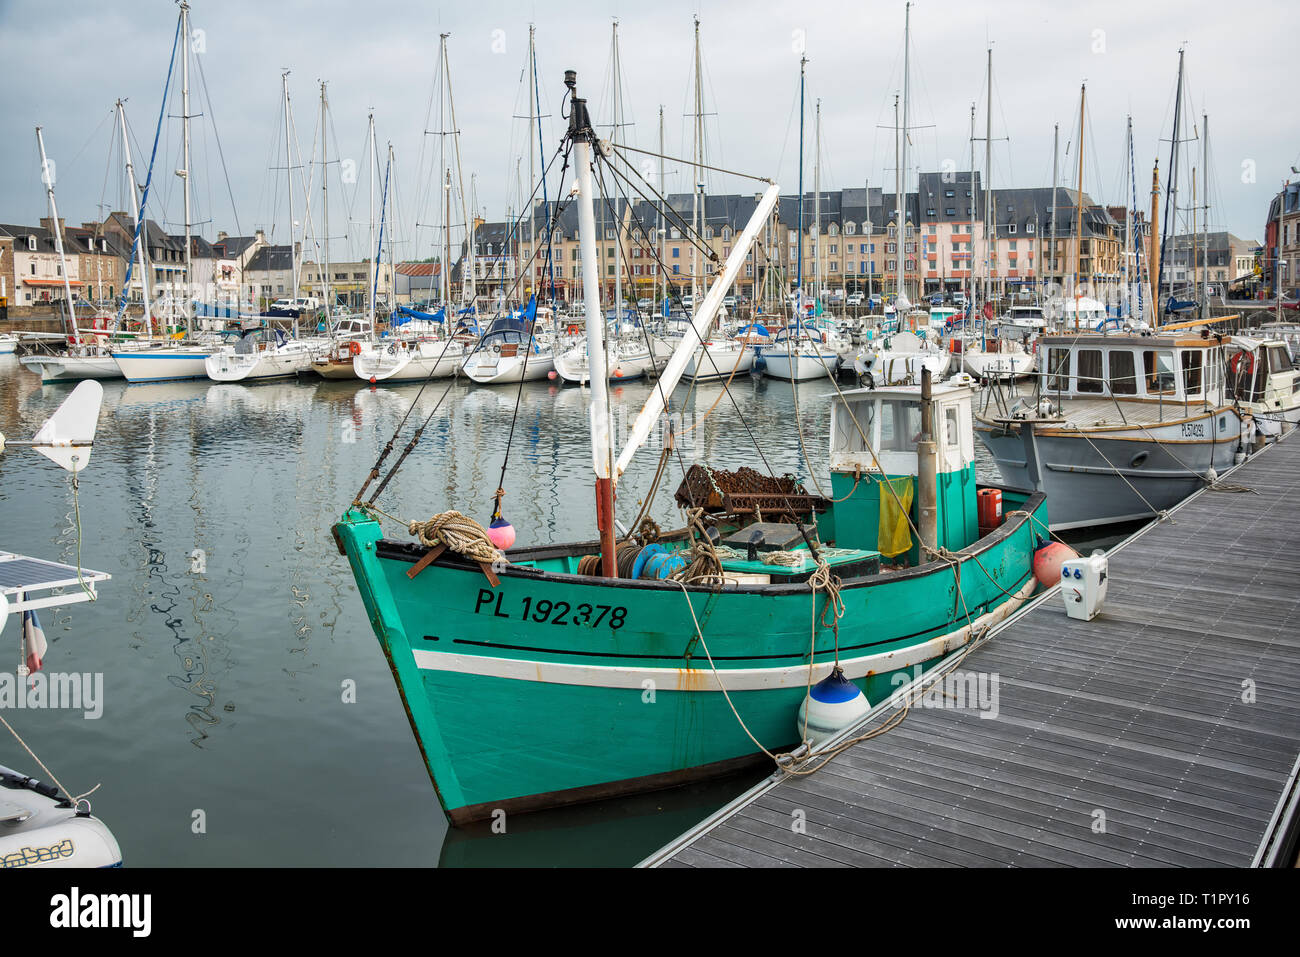 Paimpol Harbour, Paimpol, brittany, France, Europe. Fishing boats and sailing boats are moored inside the harbour. A small trawler is roped to a cleat. Stock Photo